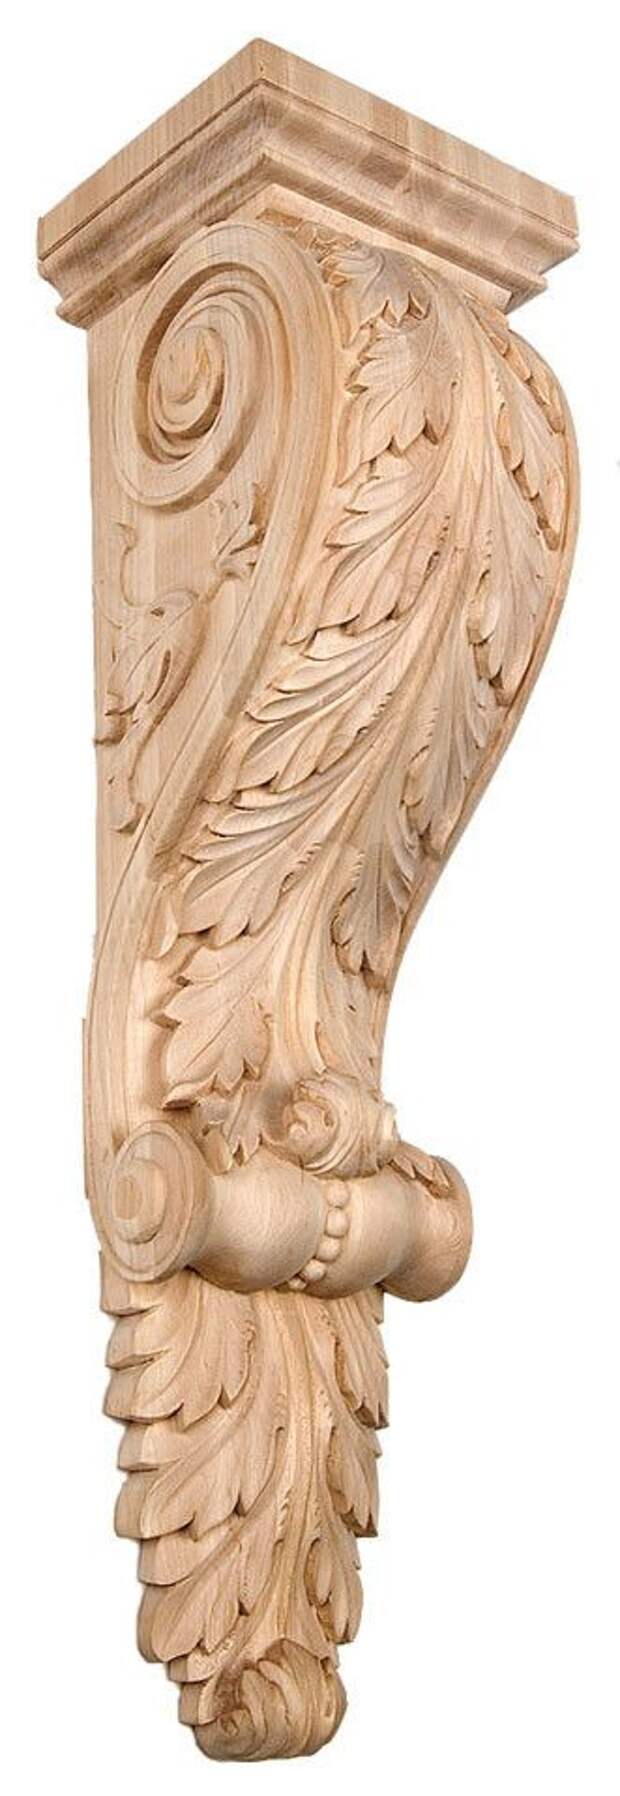 Corbel with Acanthus Leaf / Medium / 12"H X 3-5/8"W X 3-1/4"D - modern corbels, contemporary corbels, wood carved animals, embossed wood carvings, kitchen island corbels | Corbel Place